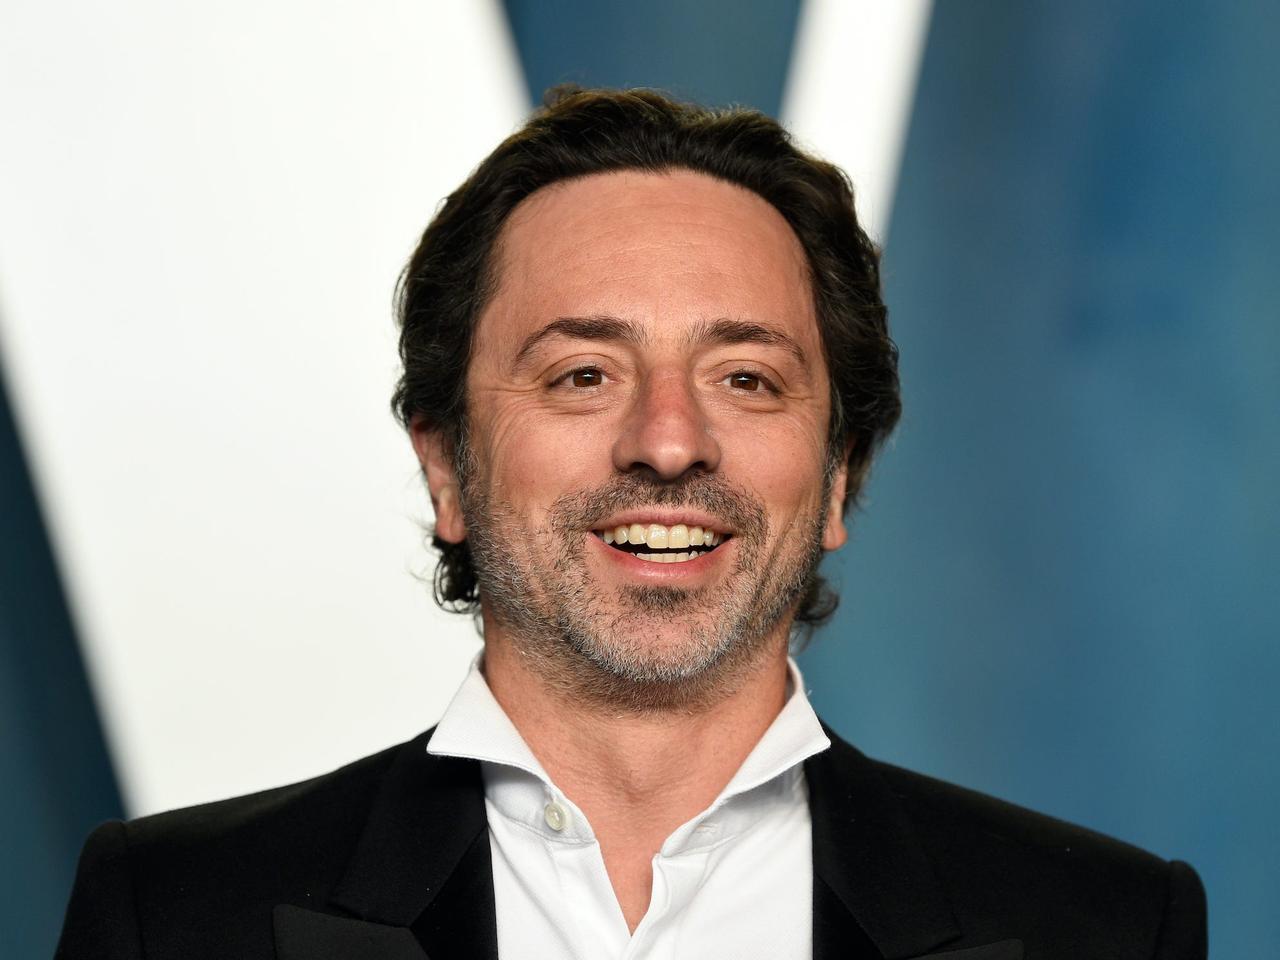 Close-up of Sergey Brin smiling on the red carpet after the Academy Awards ceremony